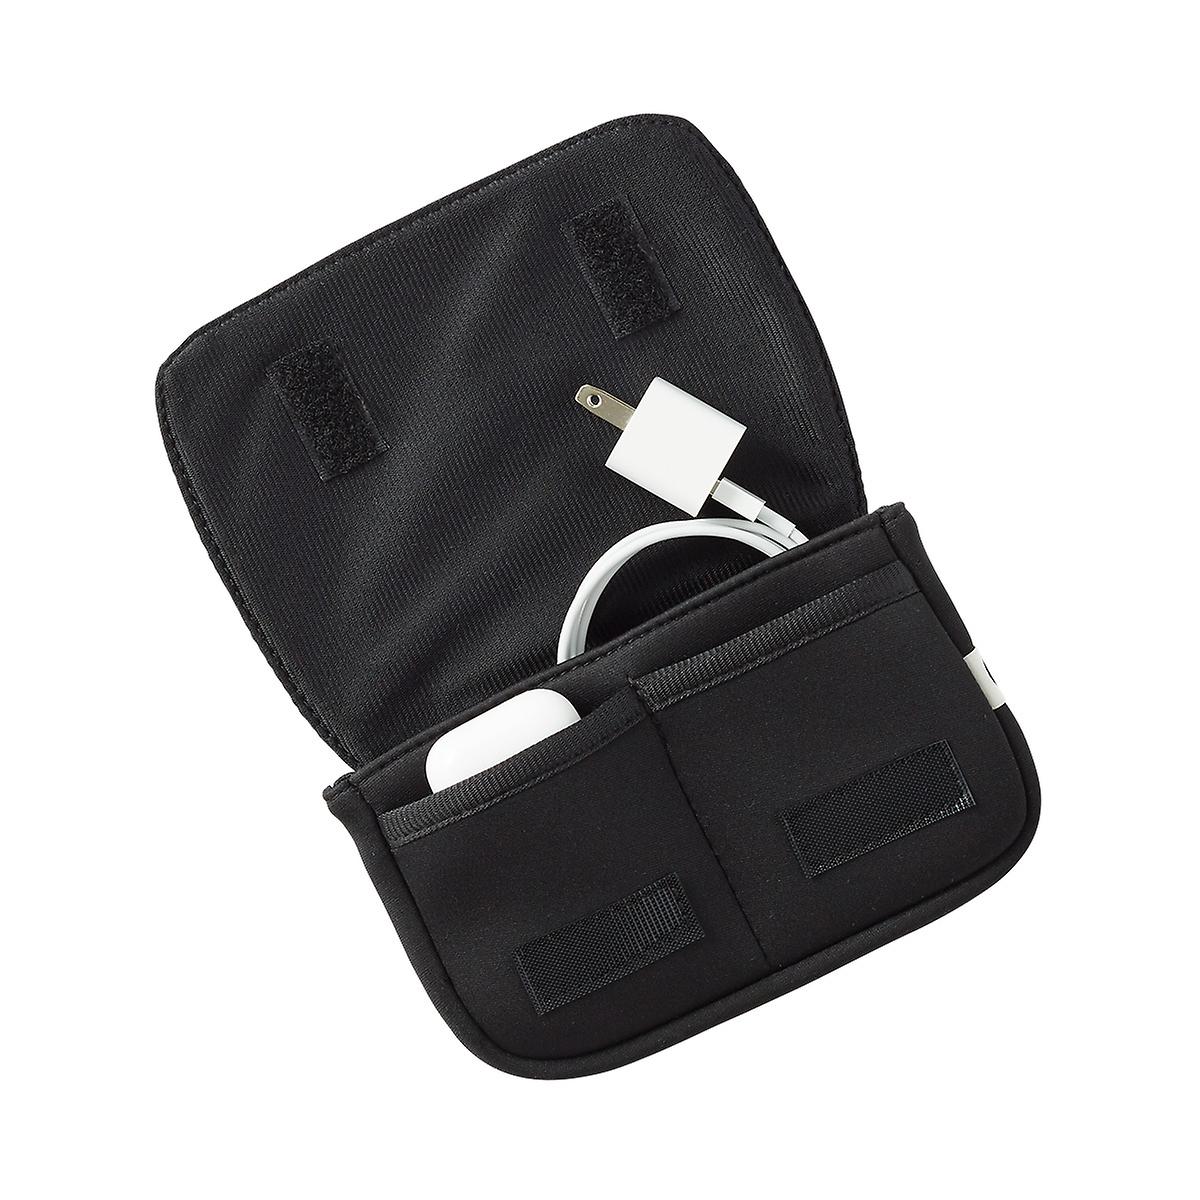 Charger & Cord Tech Case | The Container Store